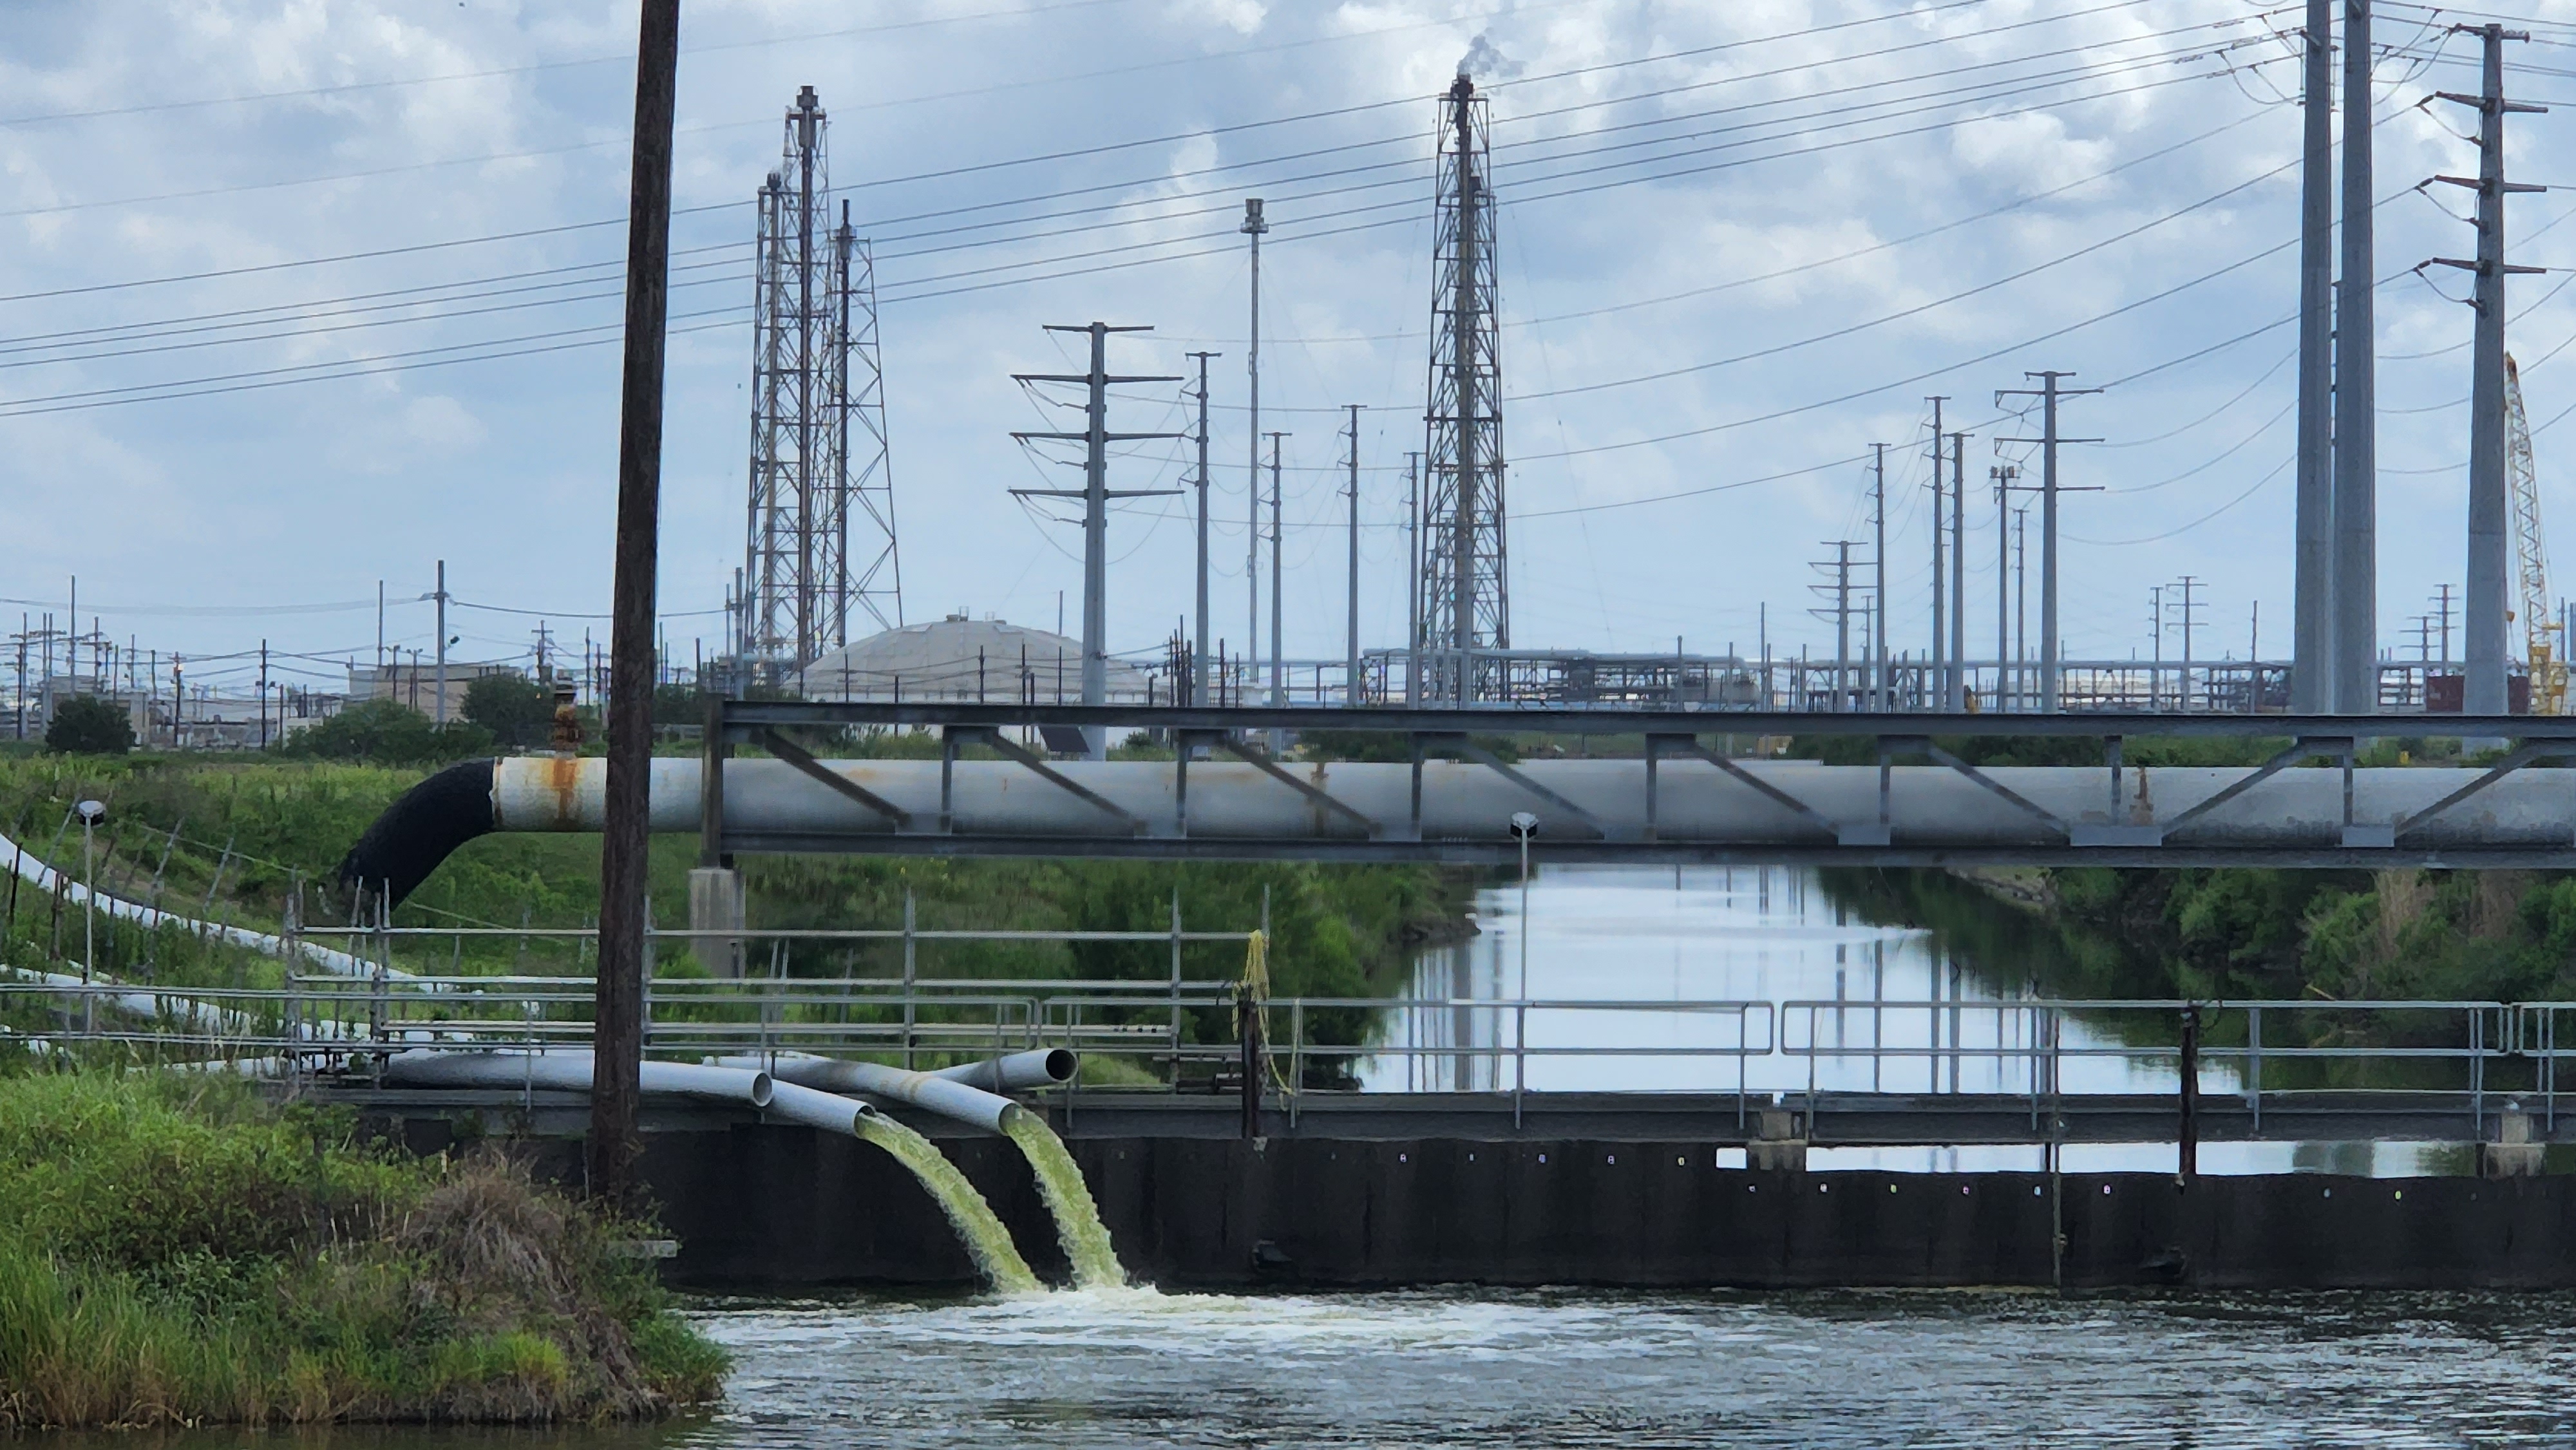 Wastewater from Motiva Refinery emptied into public canal in Port Arthur, Texas